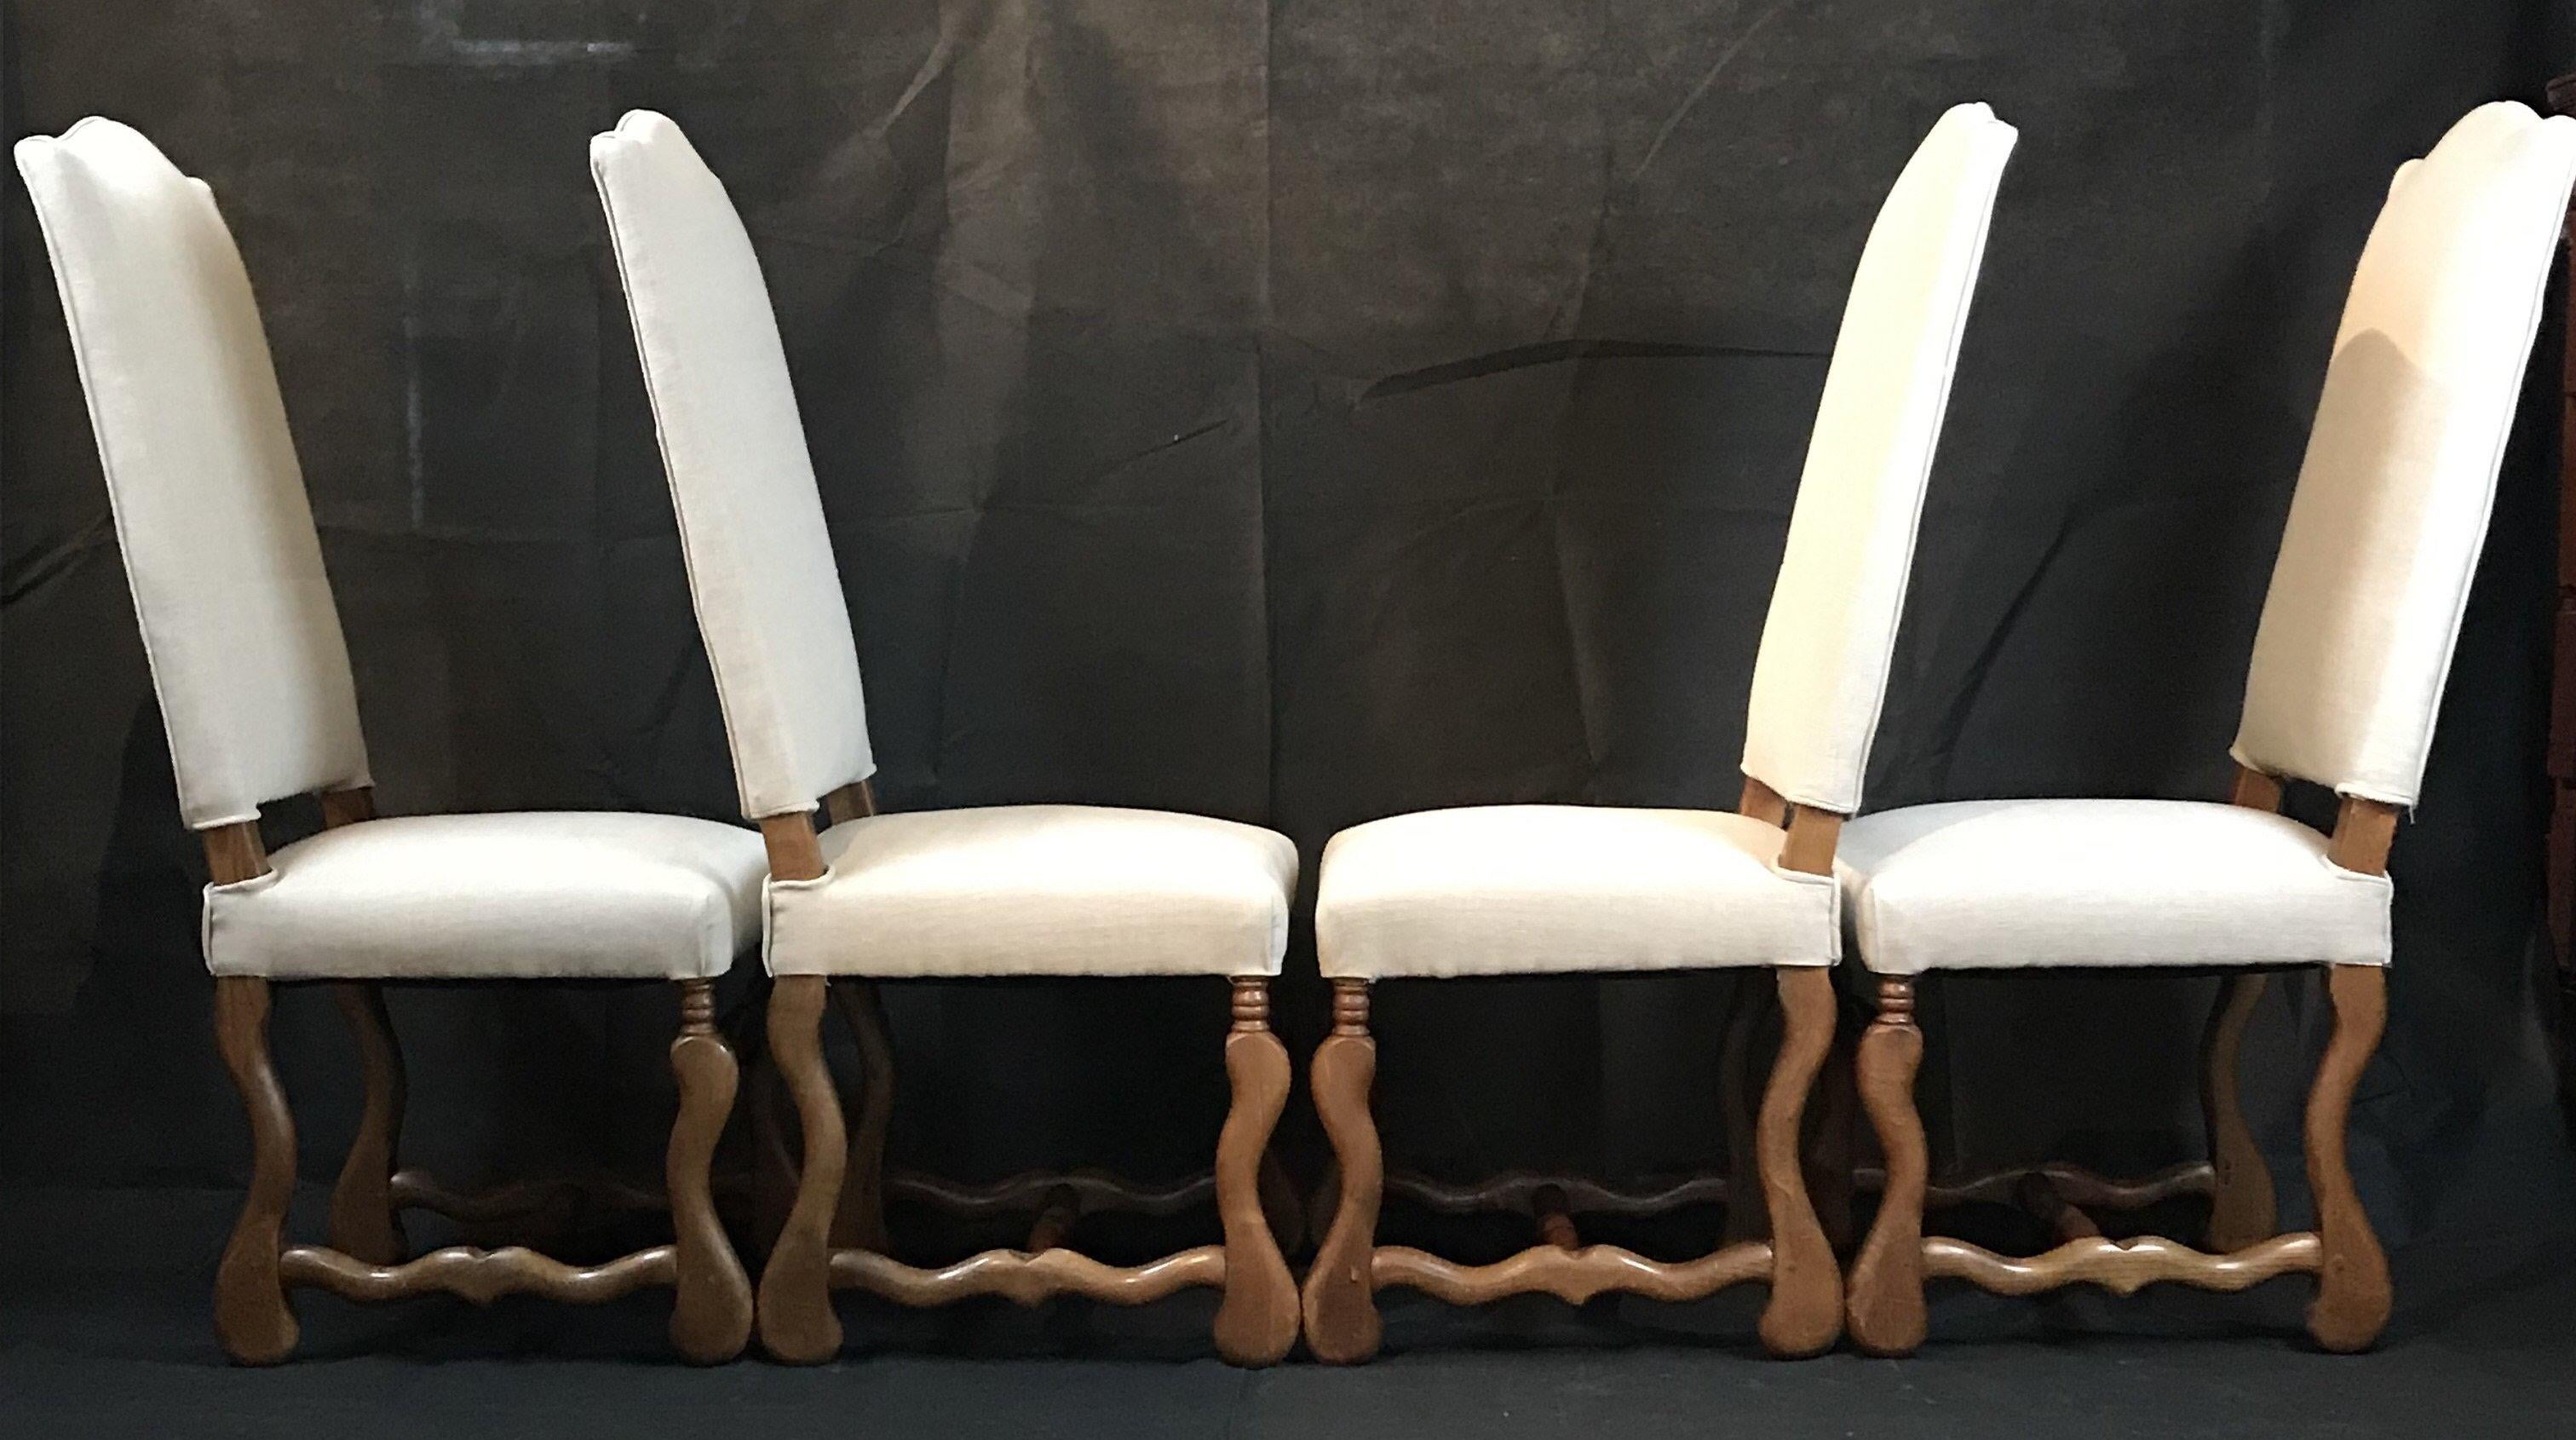 Set of four classic Os de Mouton French dining chairs, circa 1920s. Carved walnut frames and newly upholstered in a neutral linen weave cotton blend fabric. All chairs are armless. 


Dimensions: H 46.5” x H to seat 18.5” x W 19.5” x D 19”.